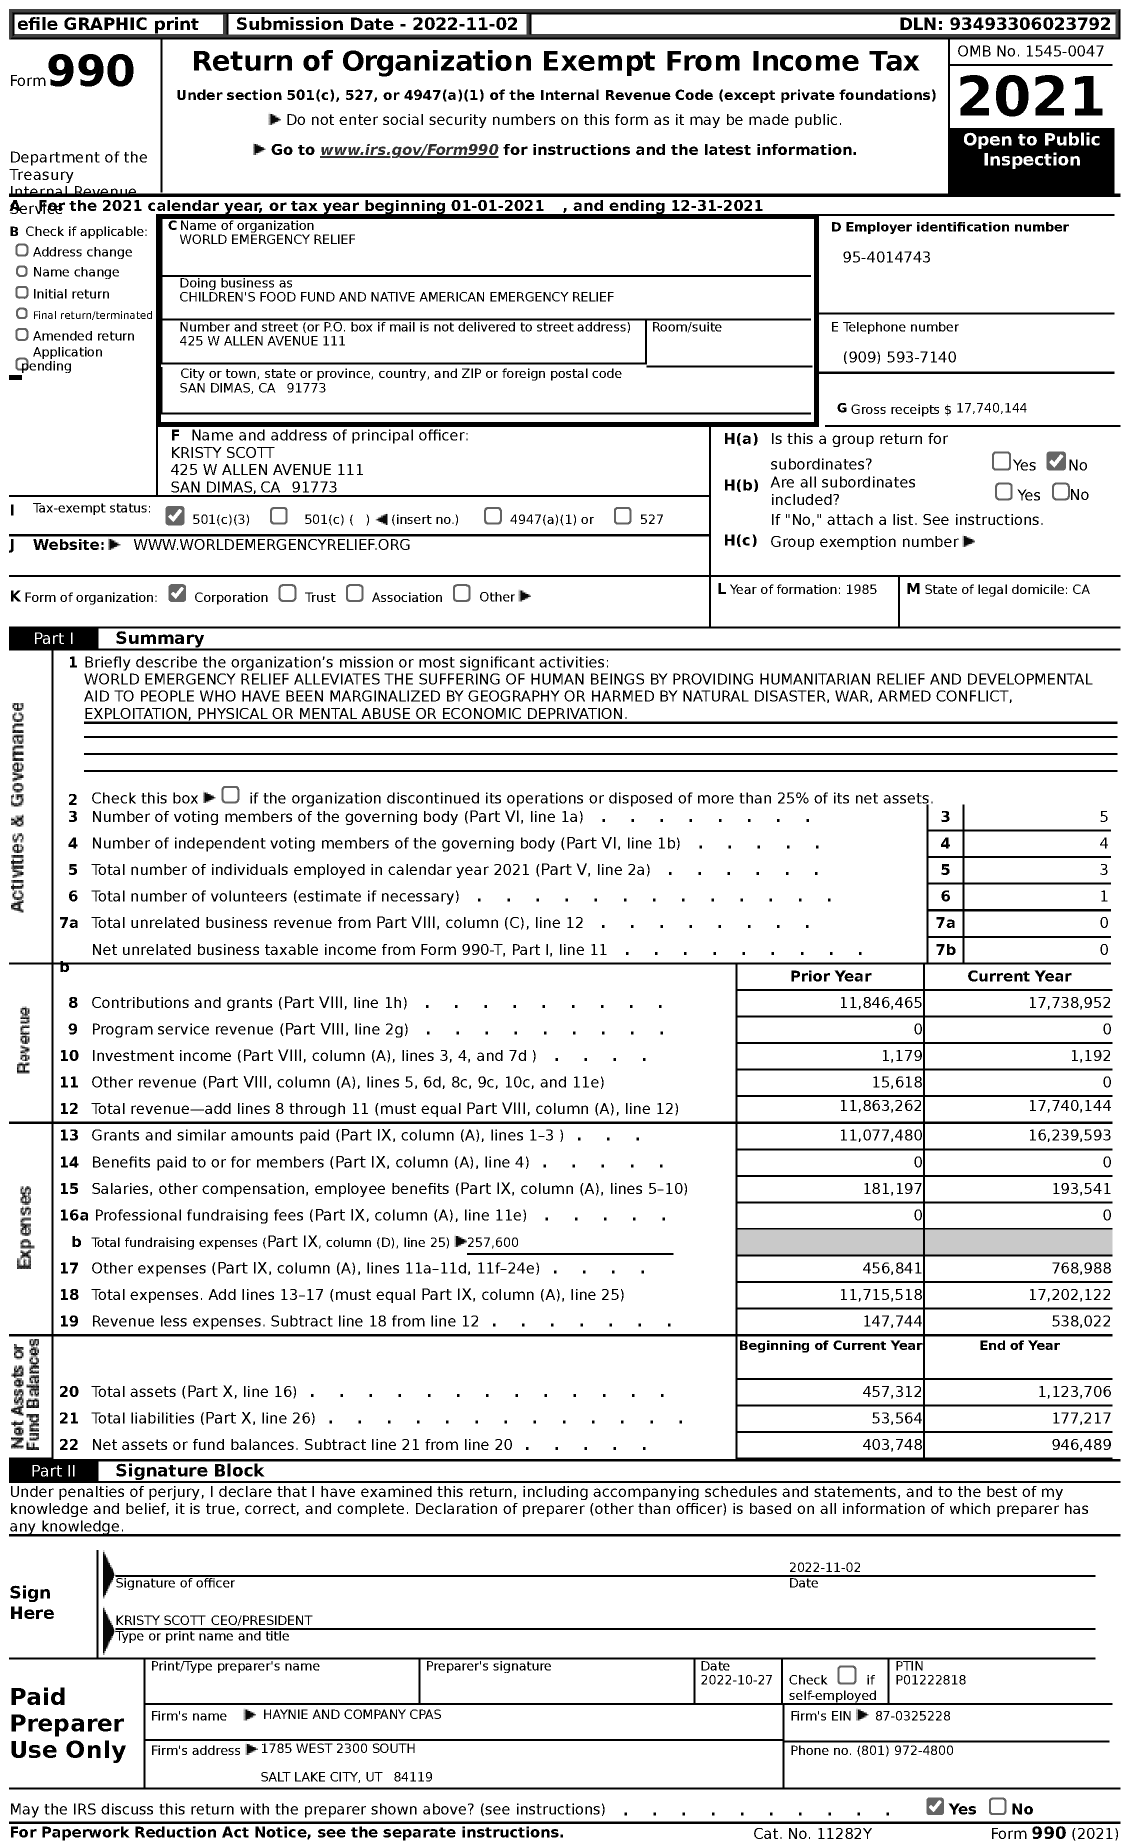 Image of first page of 2021 Form 990 for Children's Food Fund and Native American Emergency Relief (WER)